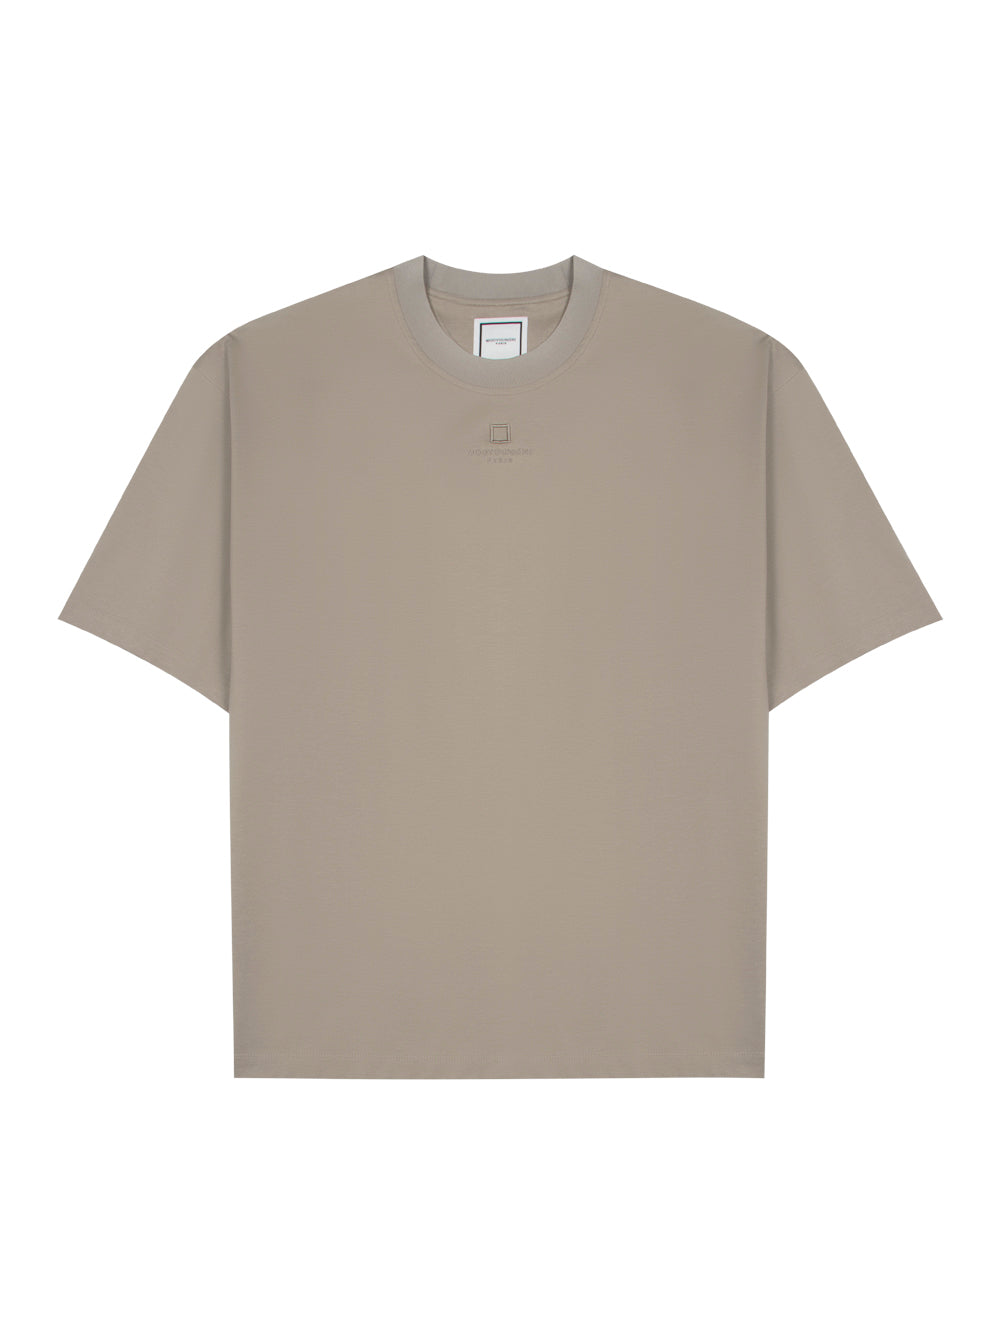 Embroidered T-Shirt (Beige)